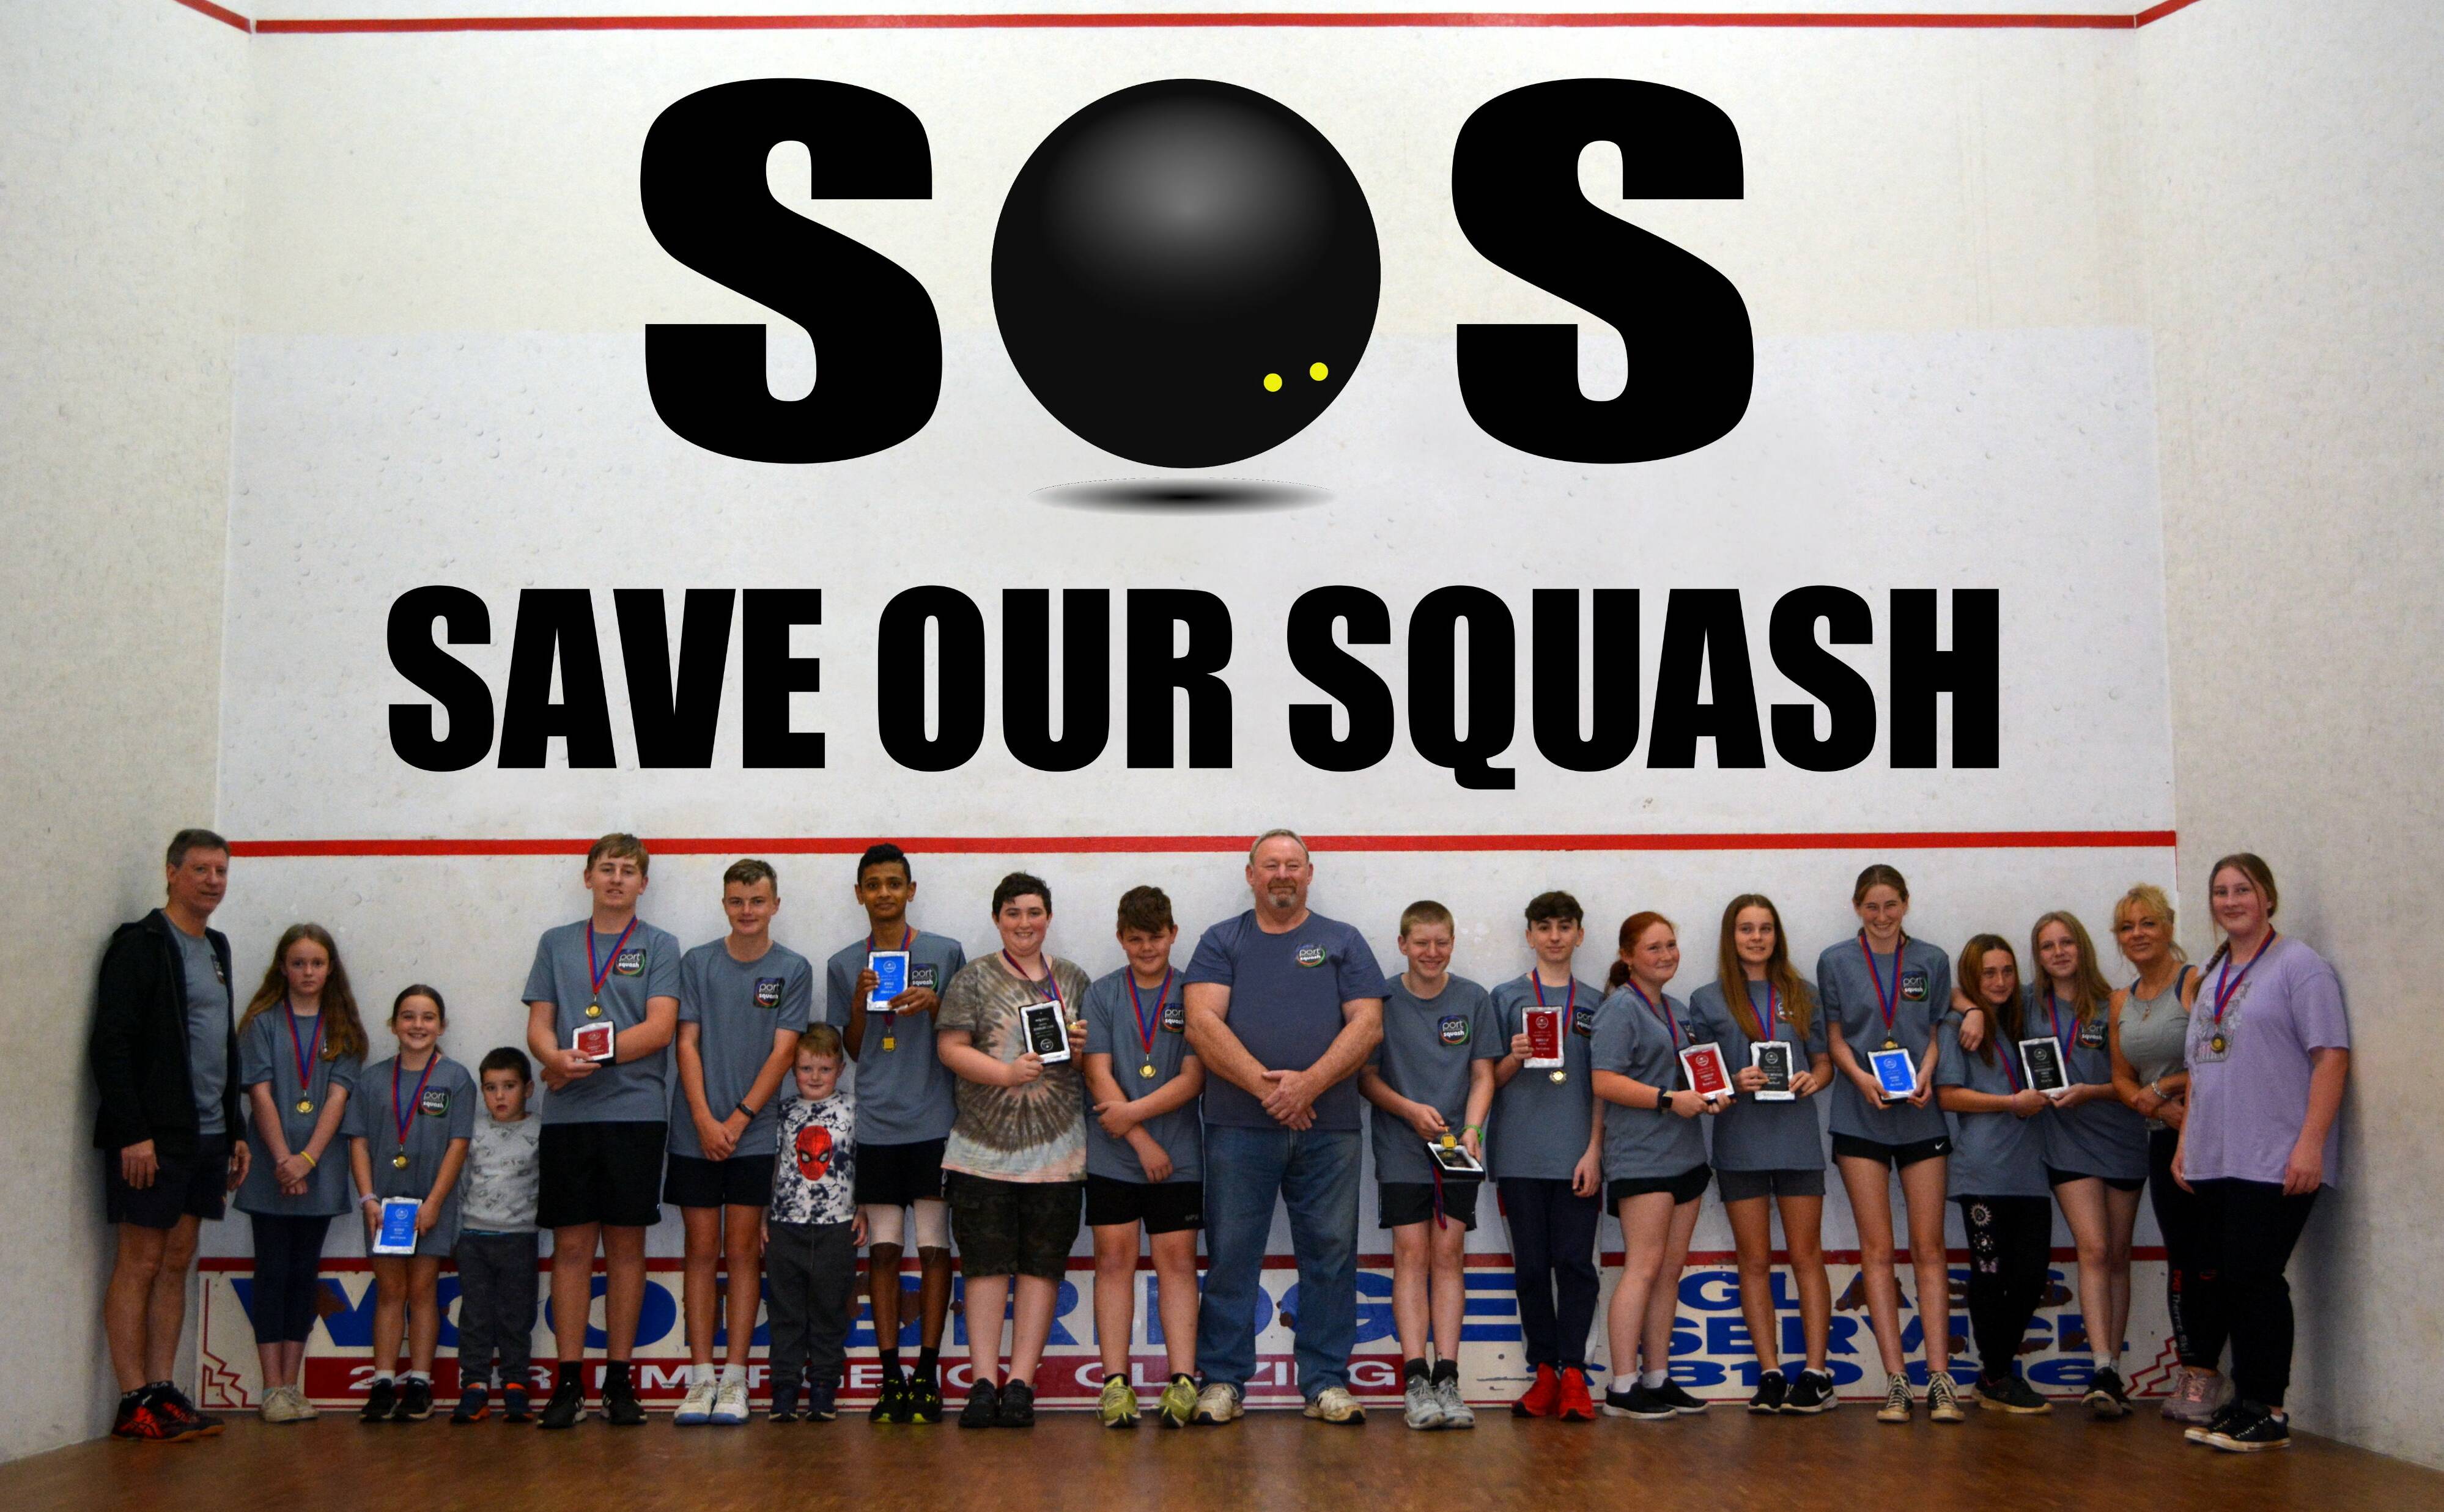 Future of Port Macquarie Squash in doubt with region's last remaining  courts set to close | Port Macquarie News | Port Macquarie, NSW